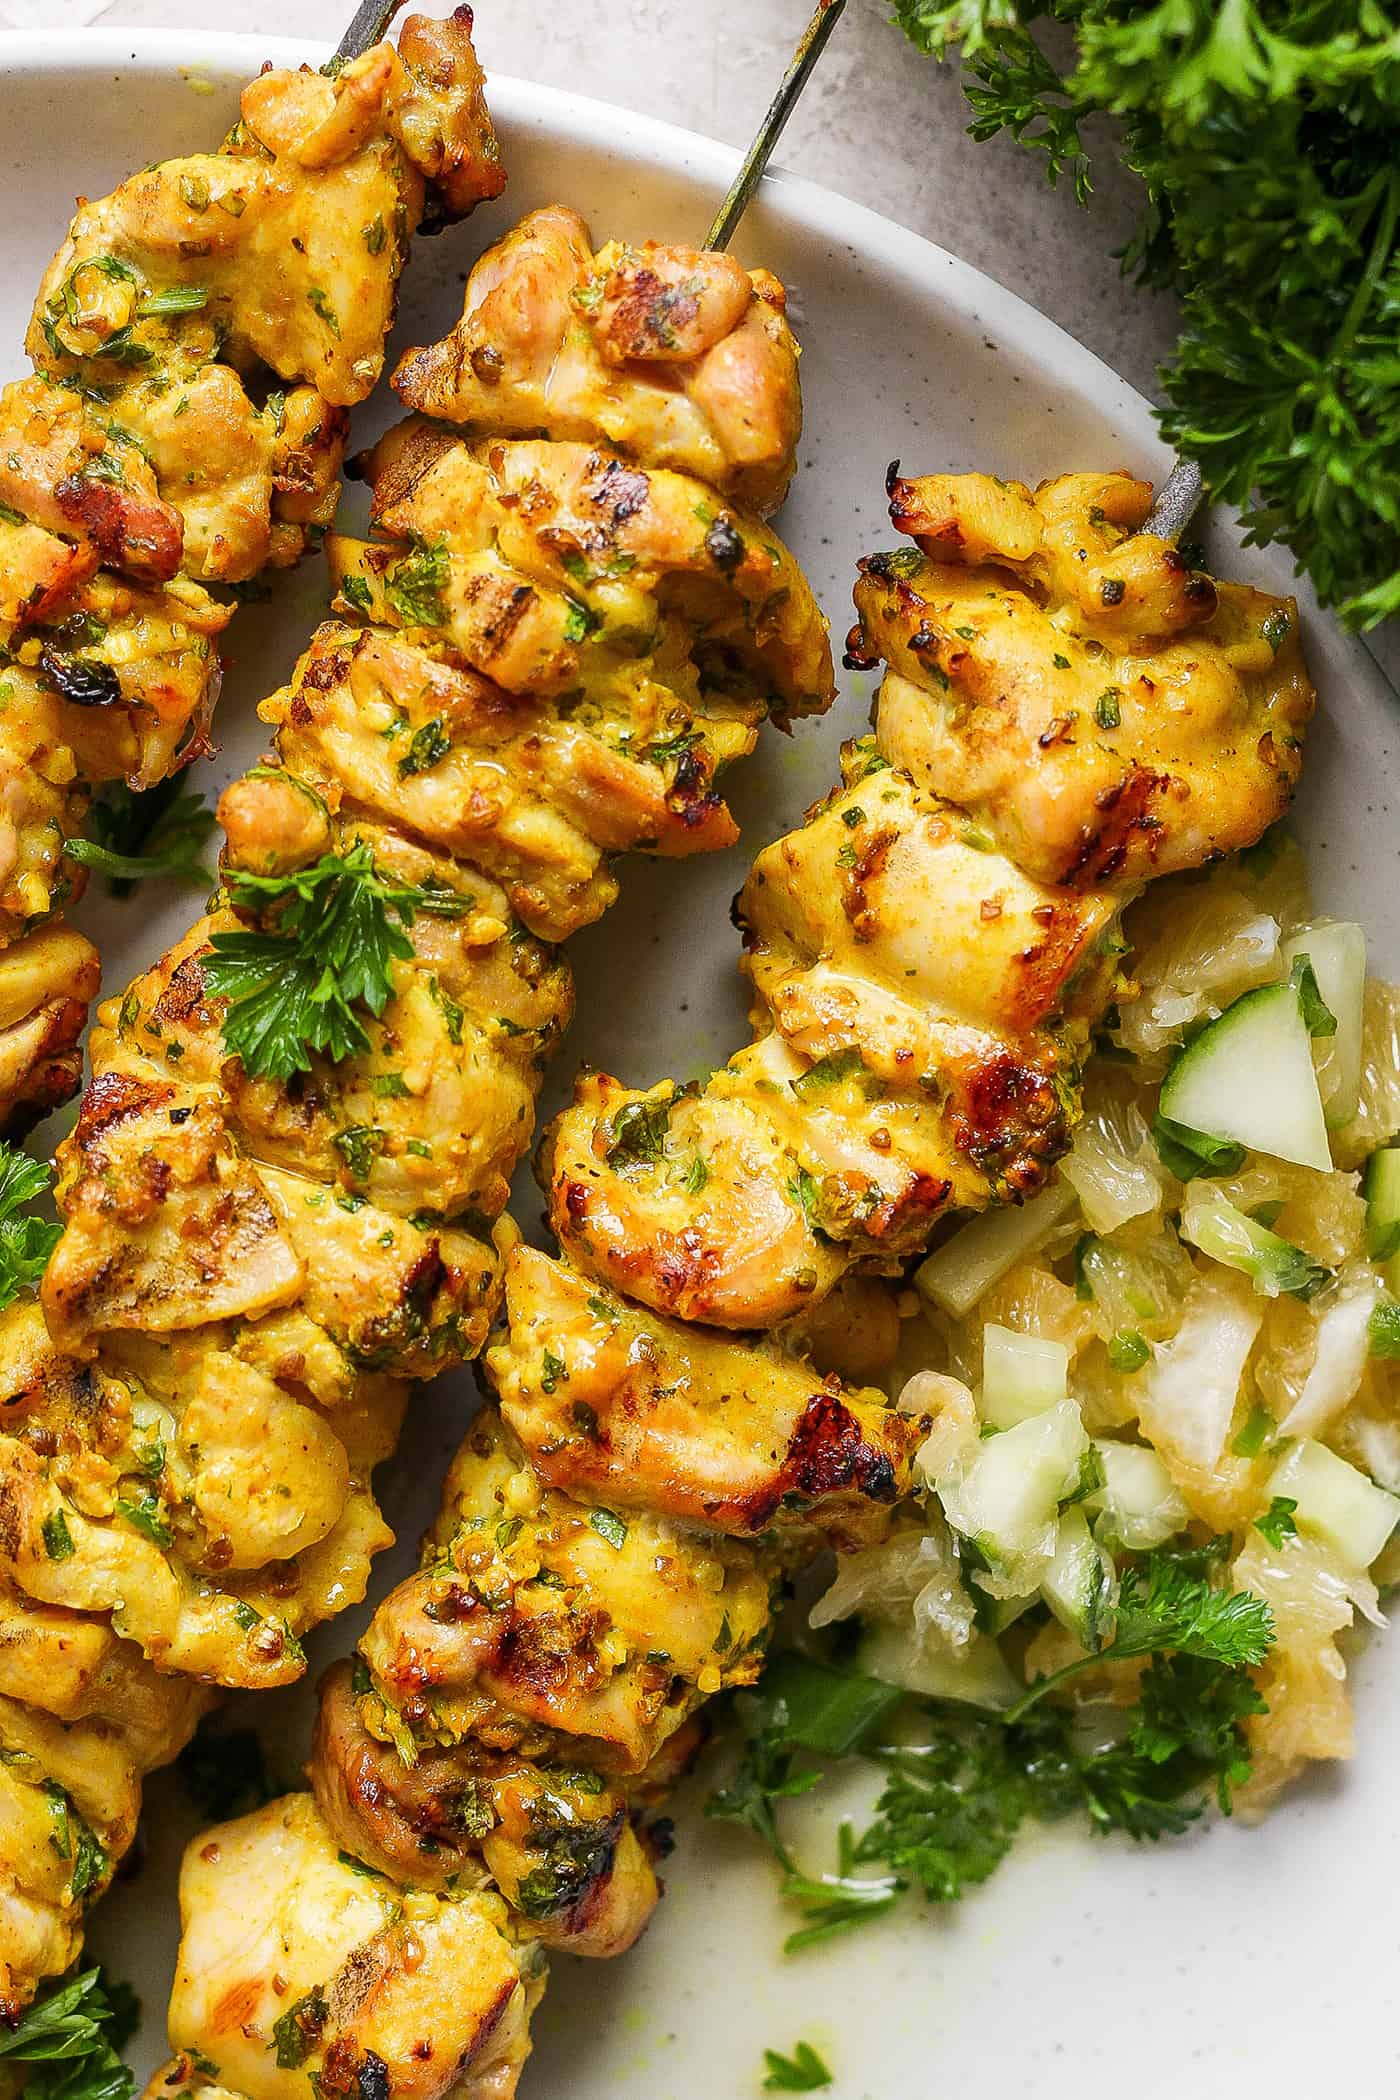 Chicken kabobs with Meyer lemon salsa are arranged on a plate